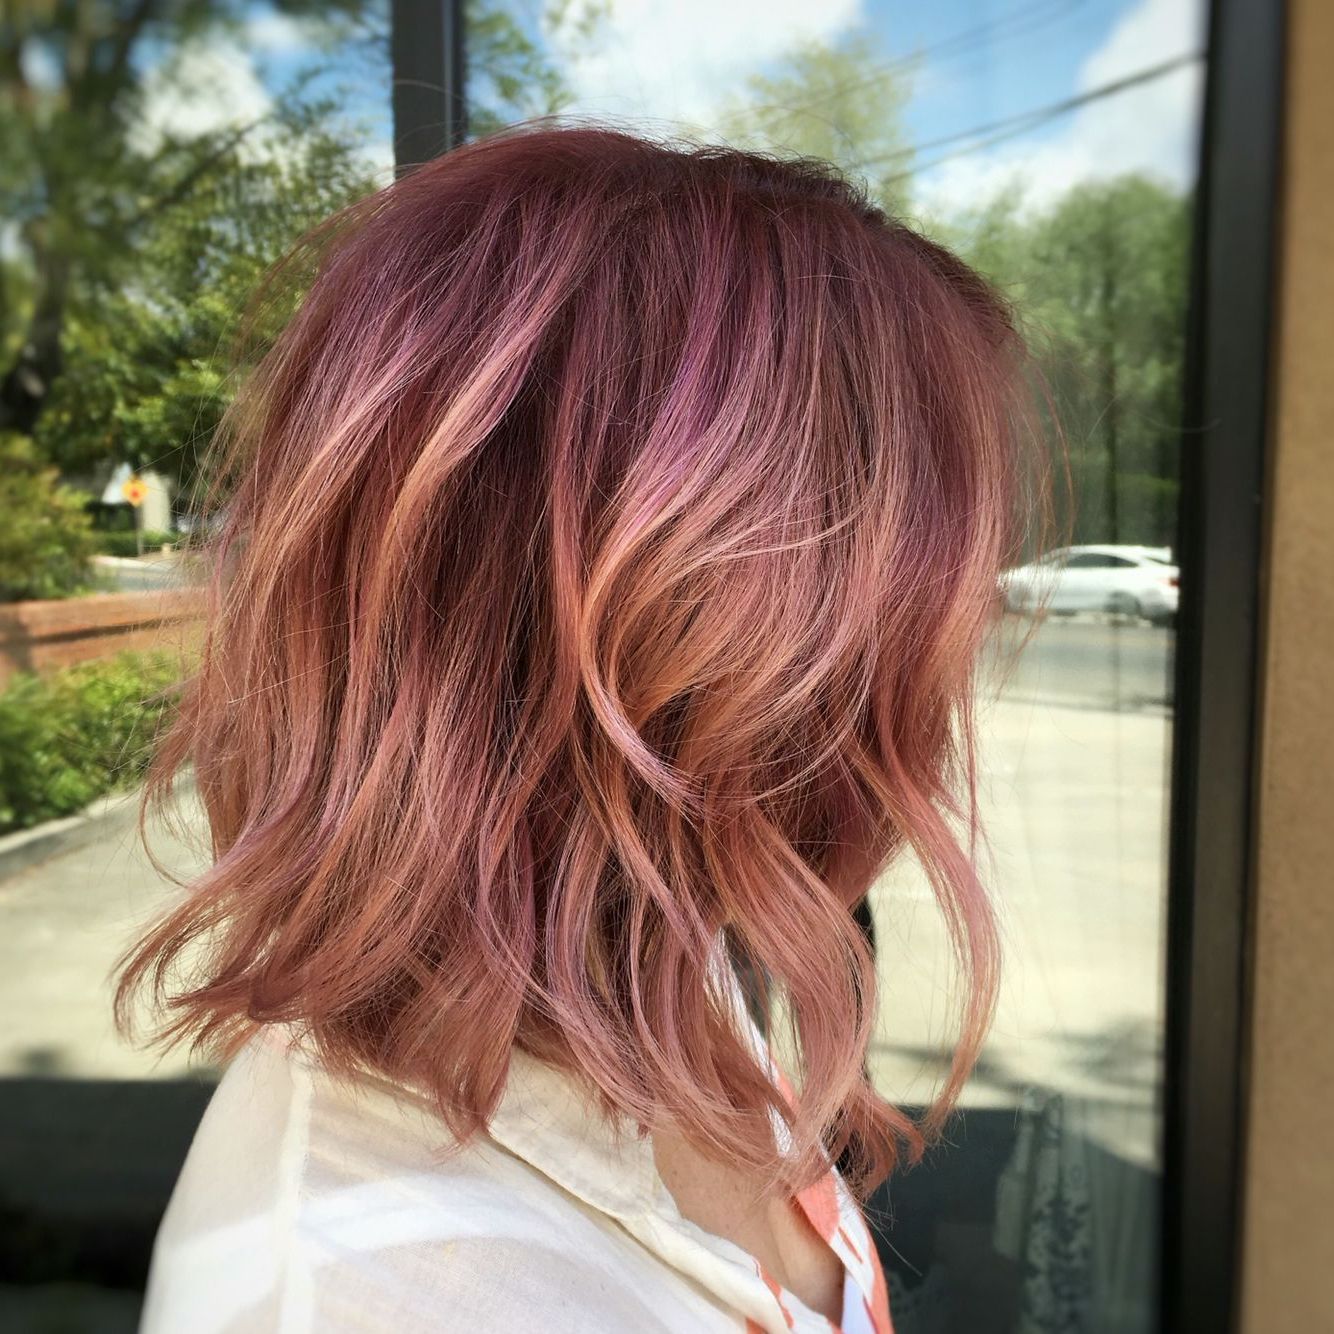 Pink Hair, Rose Gold, Rooted, Balayage, Bob, Lob, Texture, Beach Waves,  Loose Waves, | Colores De Cabello Dorado, Cabello Bonito, Rizos Con Trenzas Within Best And Newest Pink Balayage Haircuts For Wavy Lob (View 5 of 25)